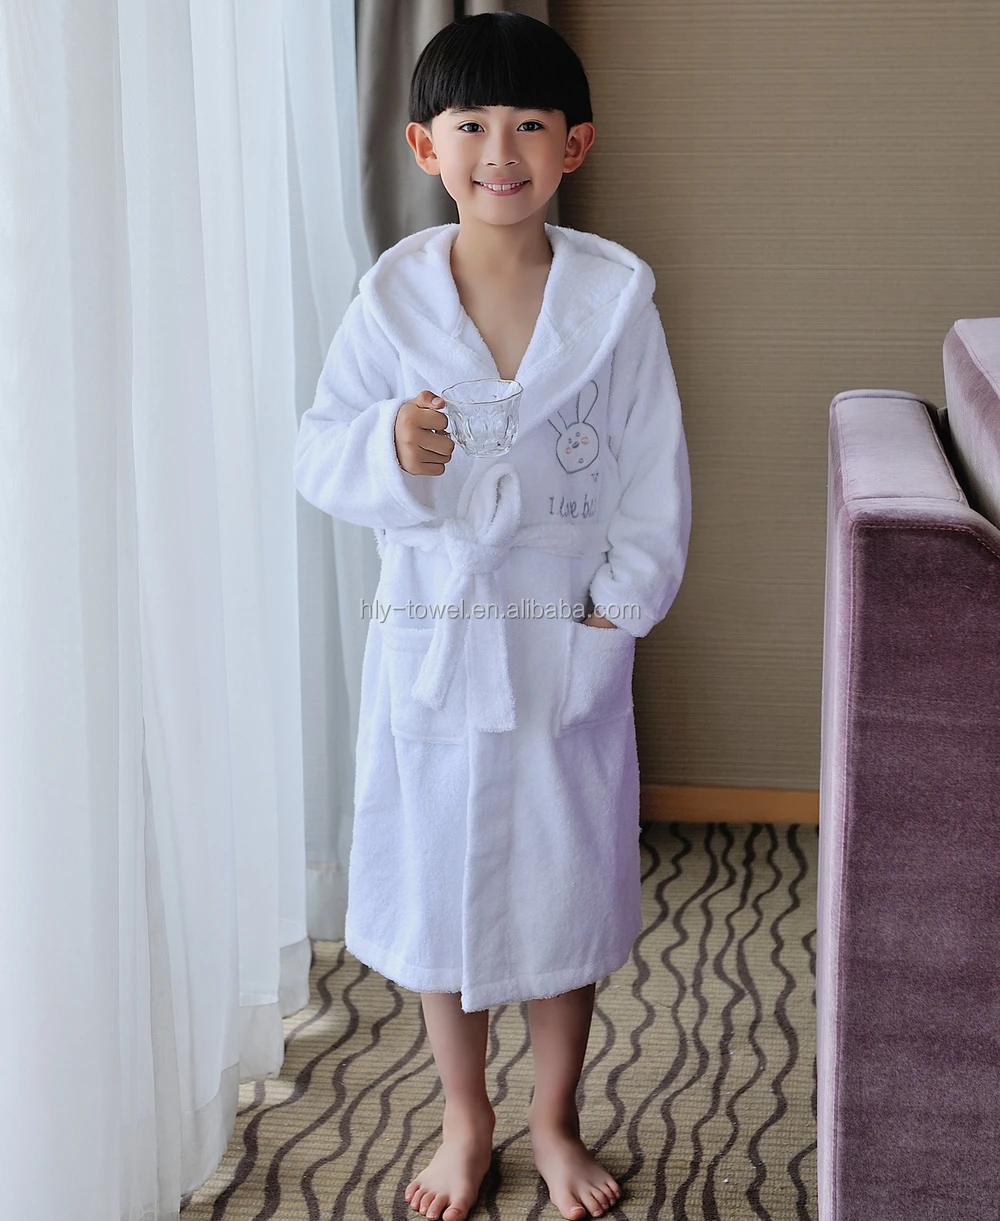 2015 Pictures Of Boys In Nightgowns Cotton Hooded Kids Robes - Buy Pictures  Of Boys In Nightgowns,2015 Robes,Cotton Hooded Kids Robes Product on  Alibaba.com